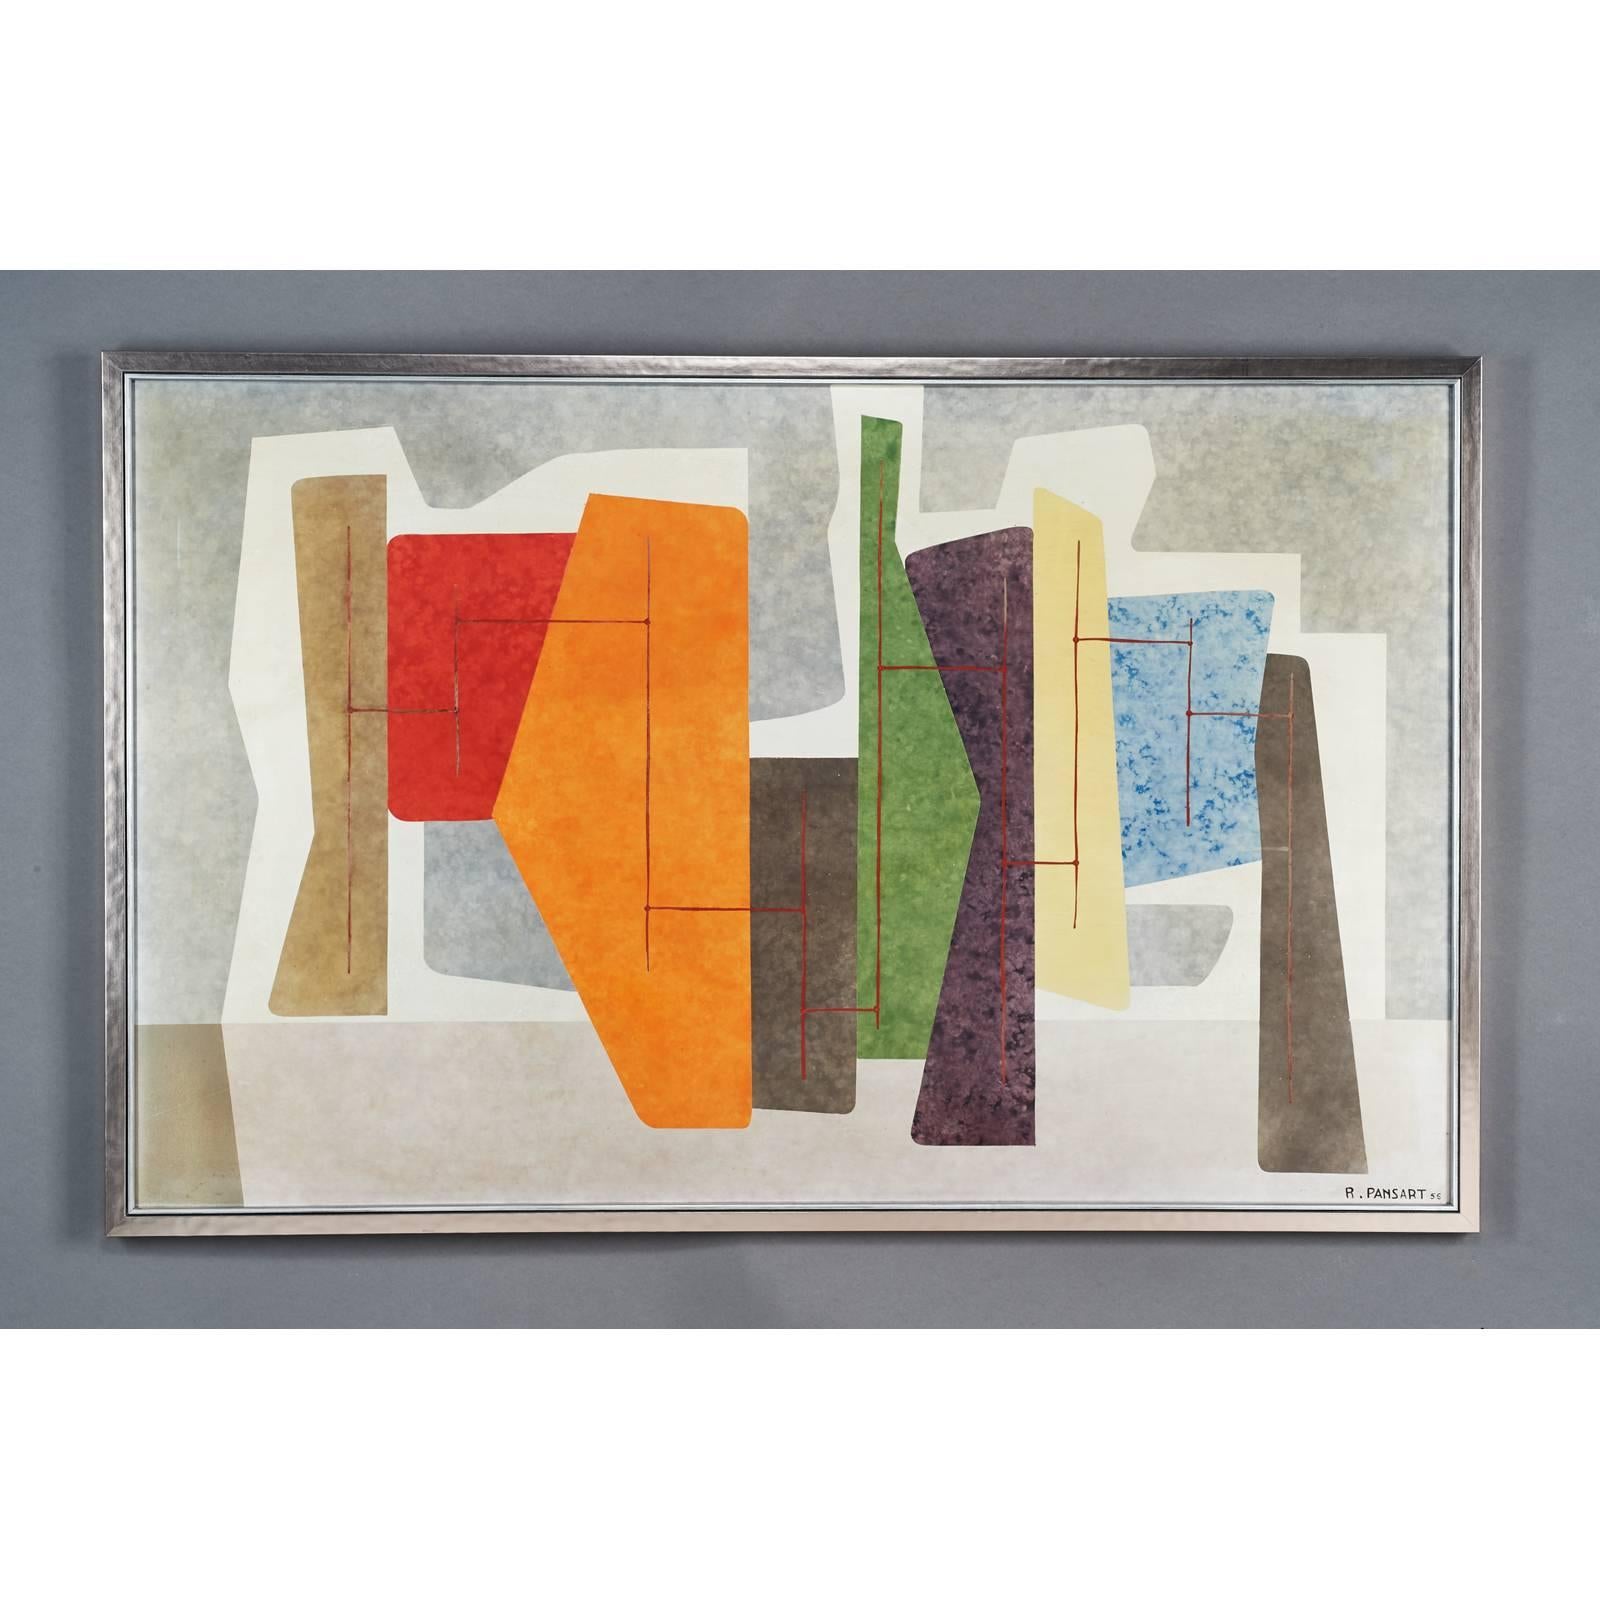 ROBERT PANSART ( 1909-1973 )
Untitled, Abstract composition
Mixed media on aluminium
Signed, dated 
France, 1956
47 W x 30 H framed

Bibliography: 